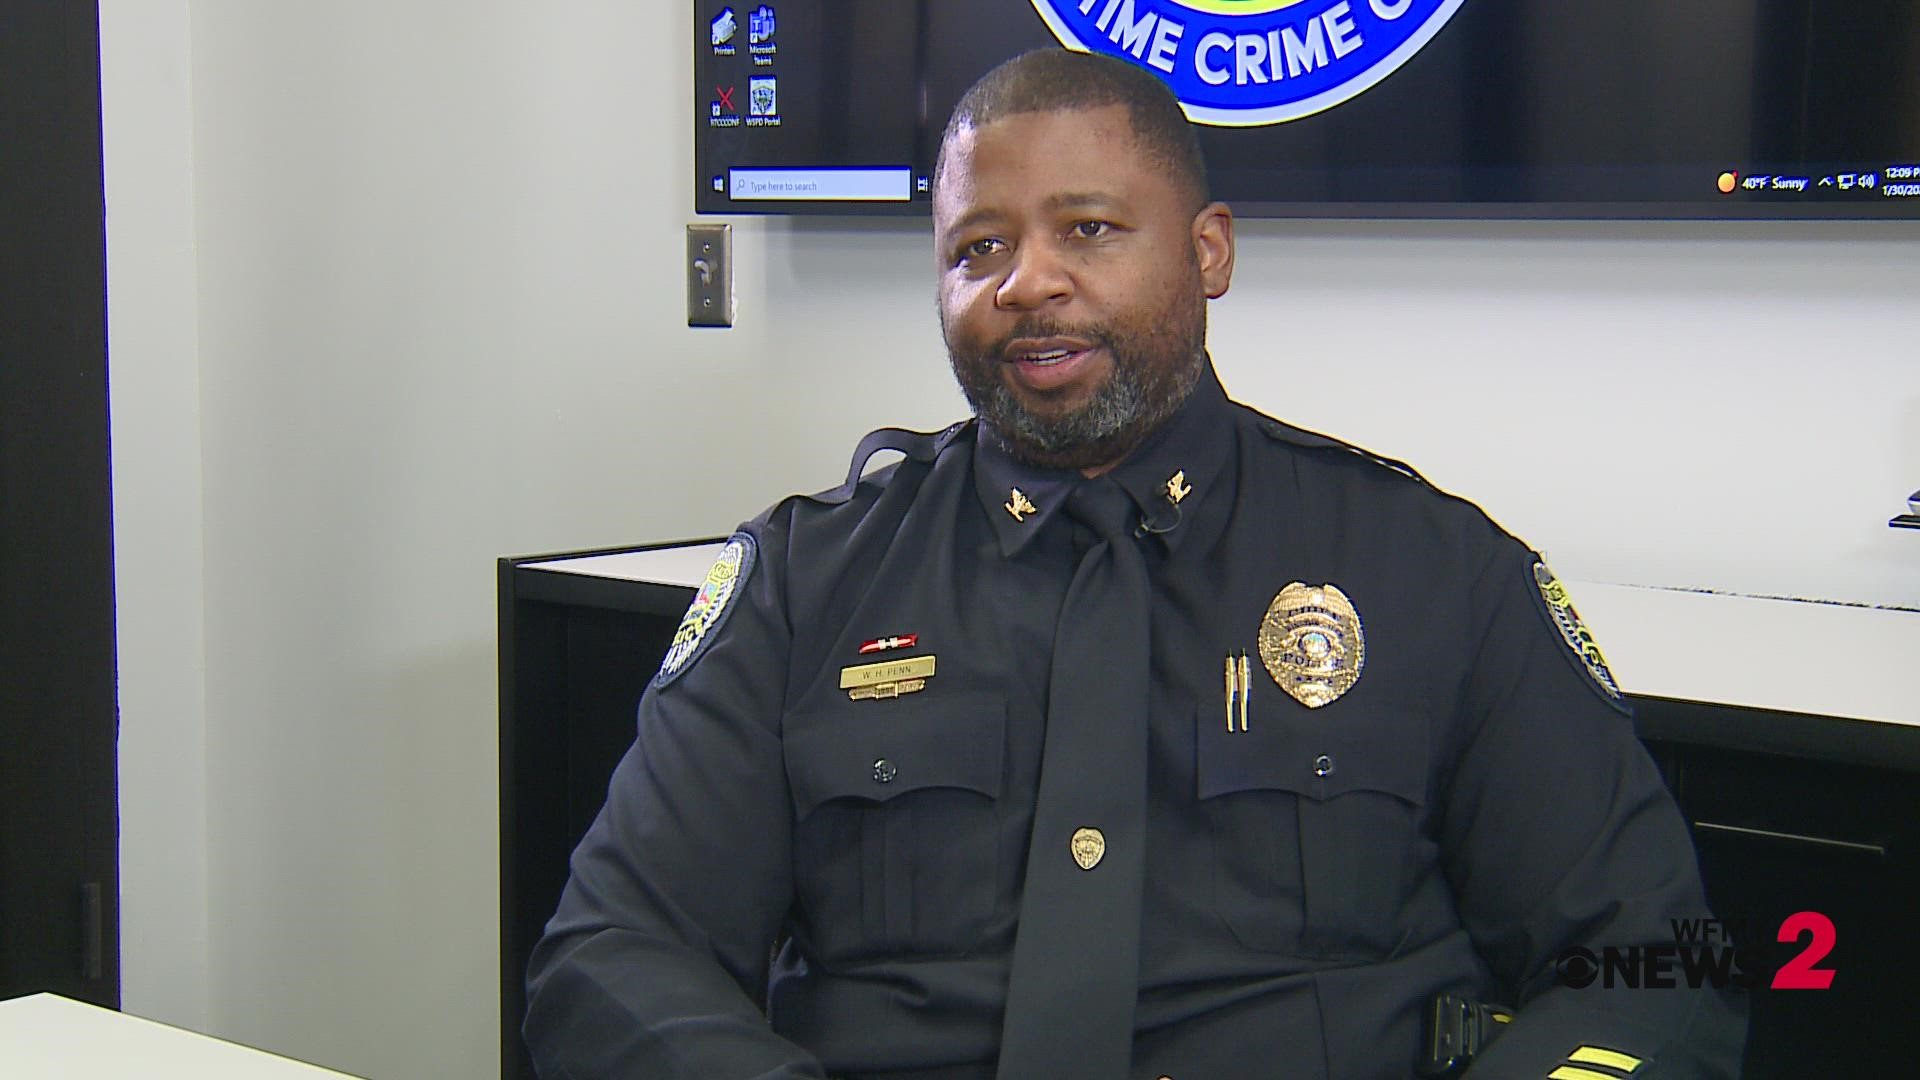 Winston-Salem city manager appoints William Penn, Jr. as the new chief of police.